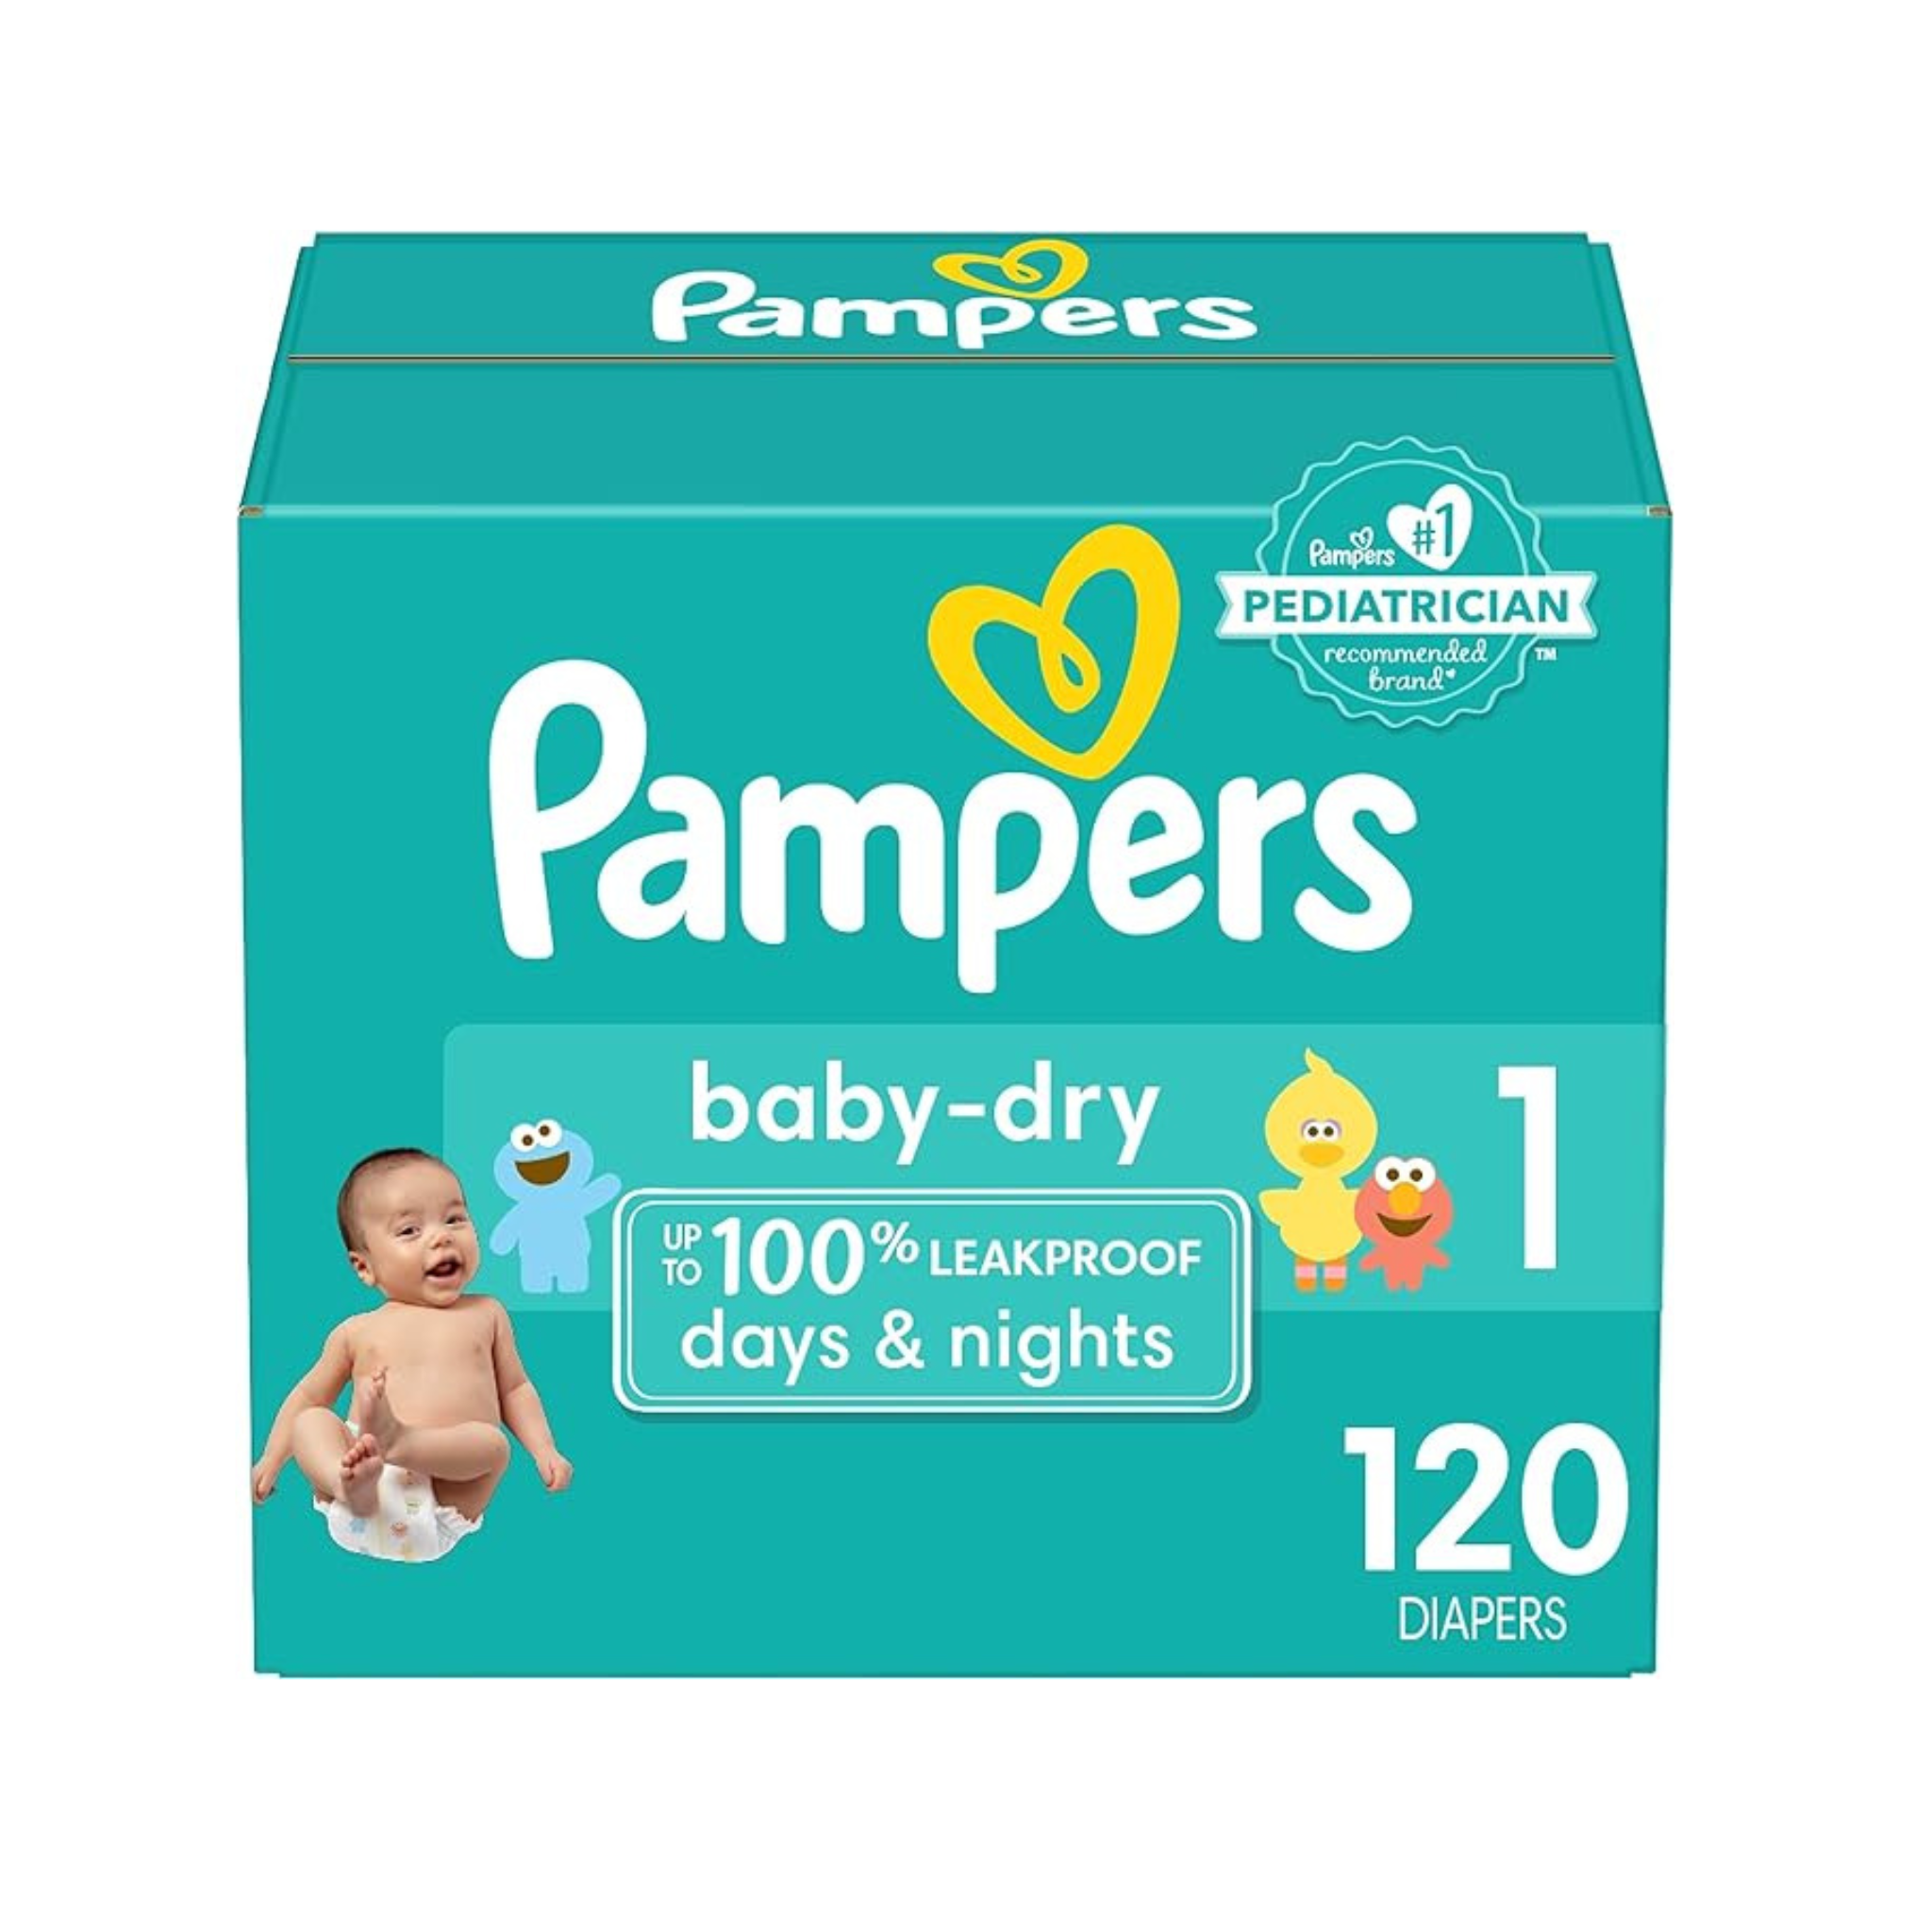 Receive A $10 Amazon Promotional Credit When You Buy 2 Boxes Of Diapers